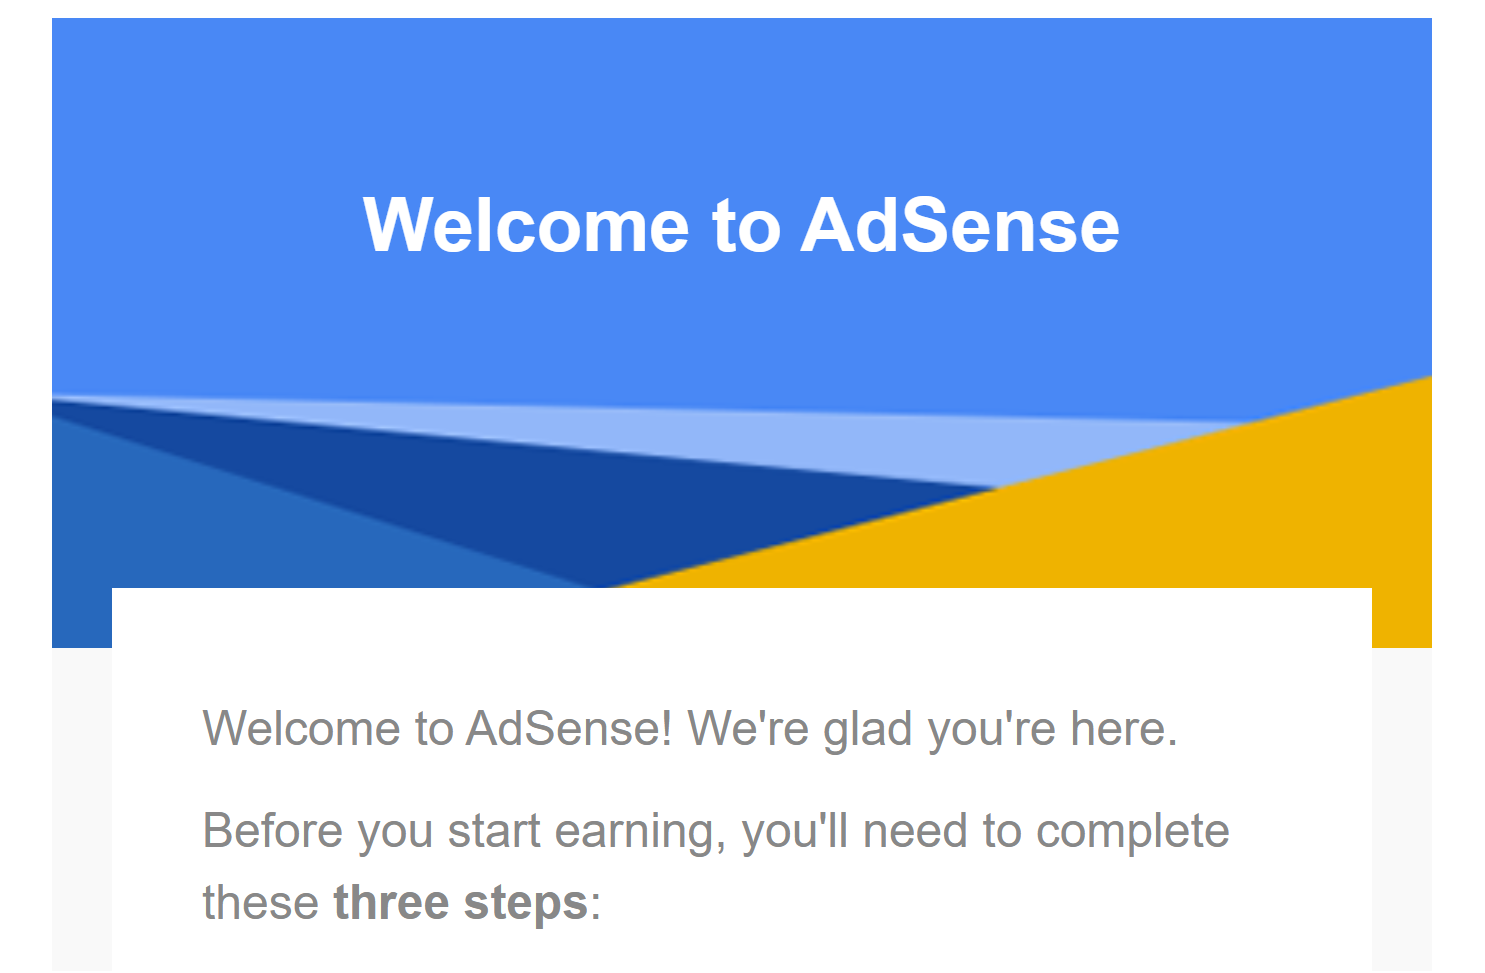 When to apply for Google Adsense